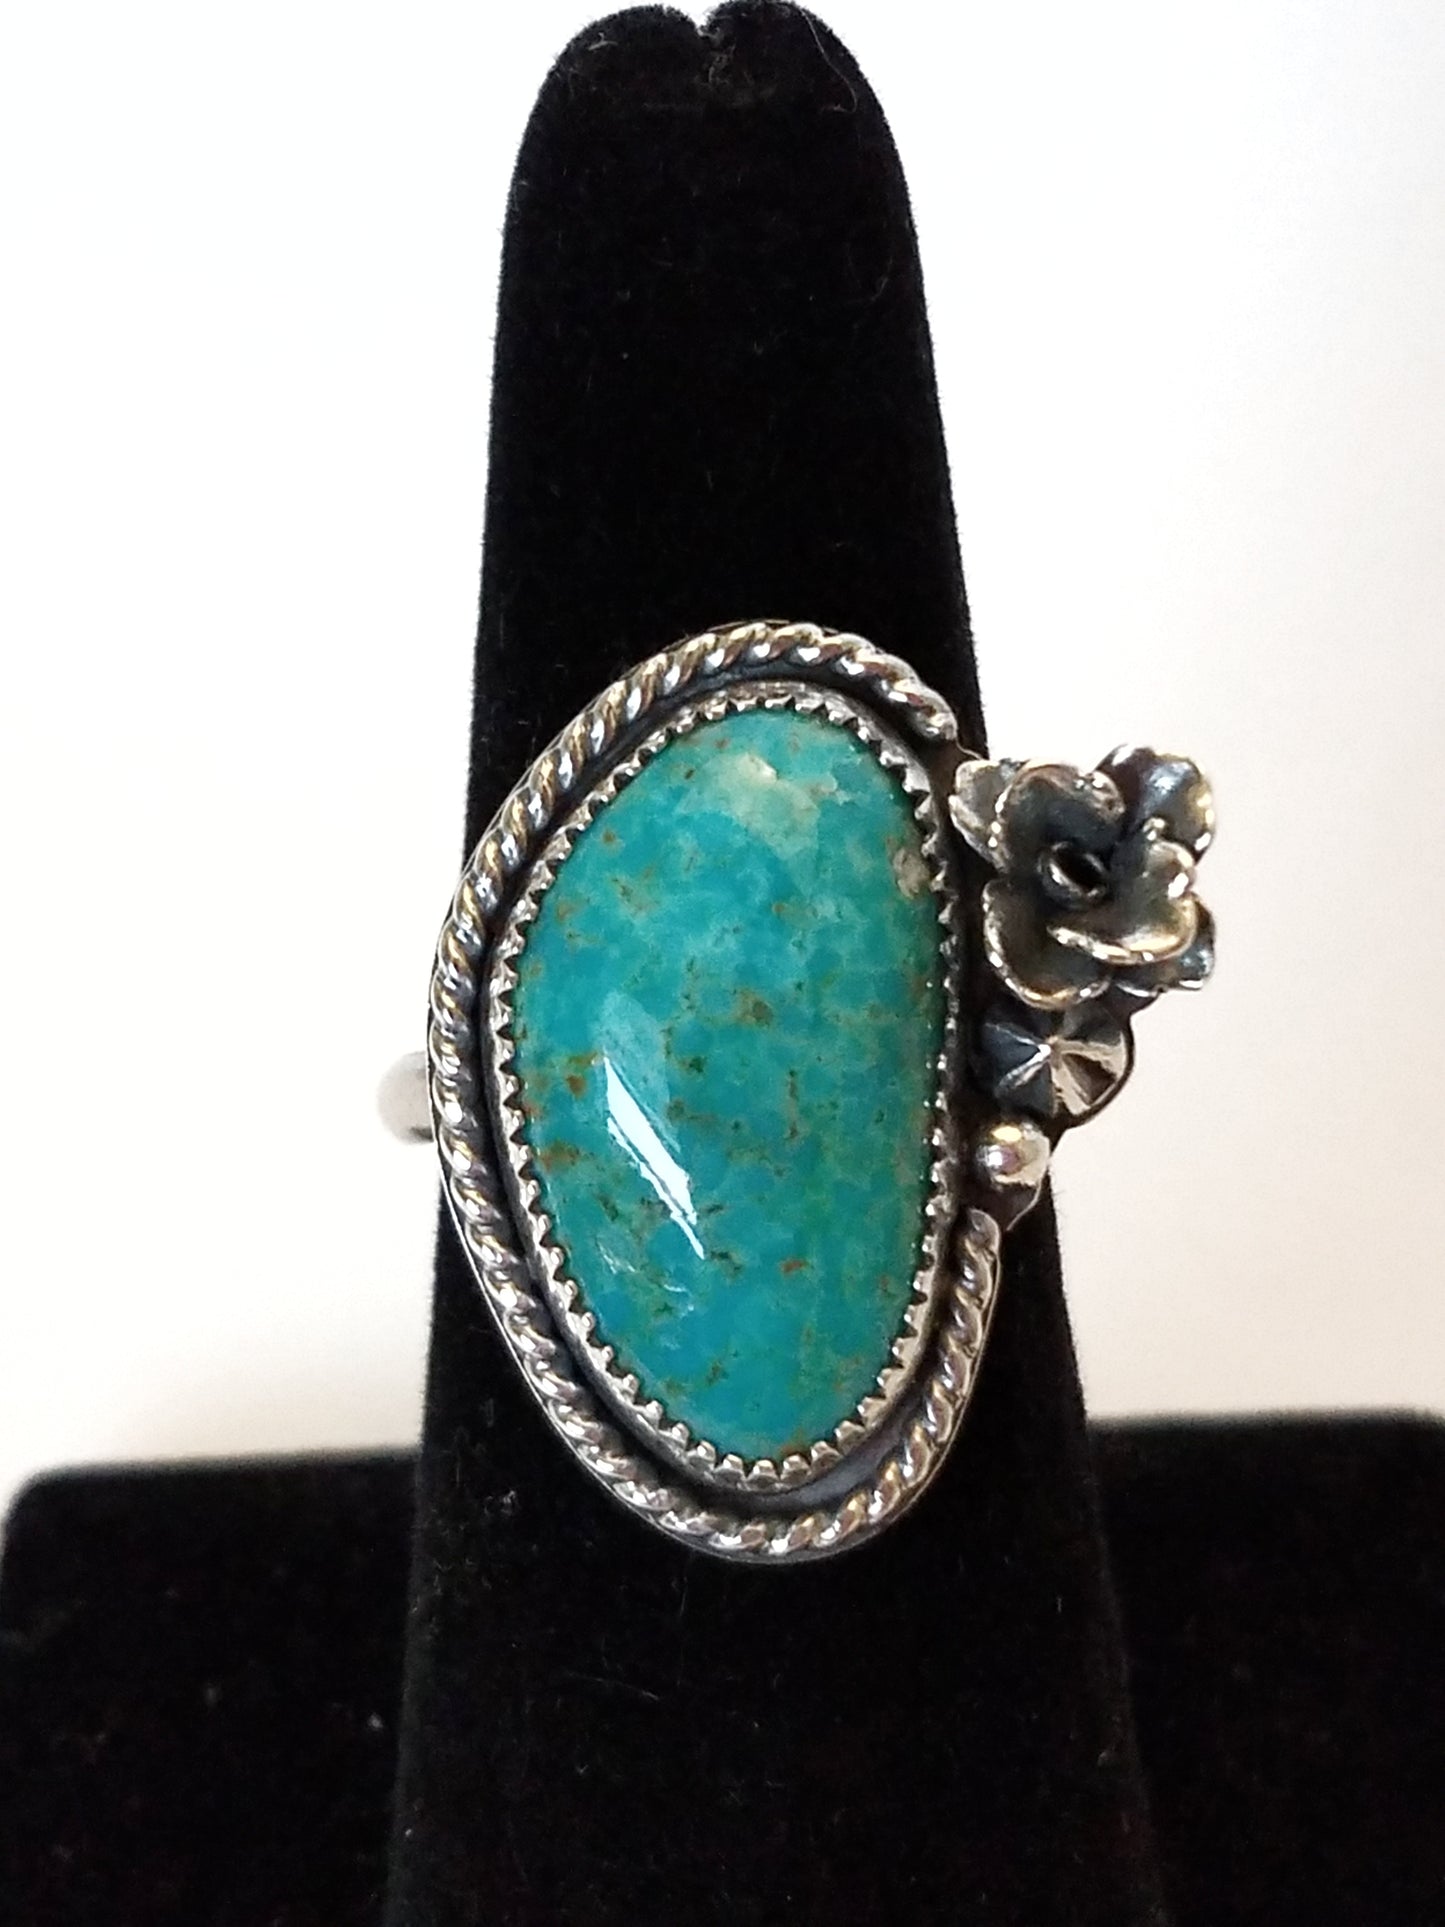 Turquoise and Succulent Ring size 8.25